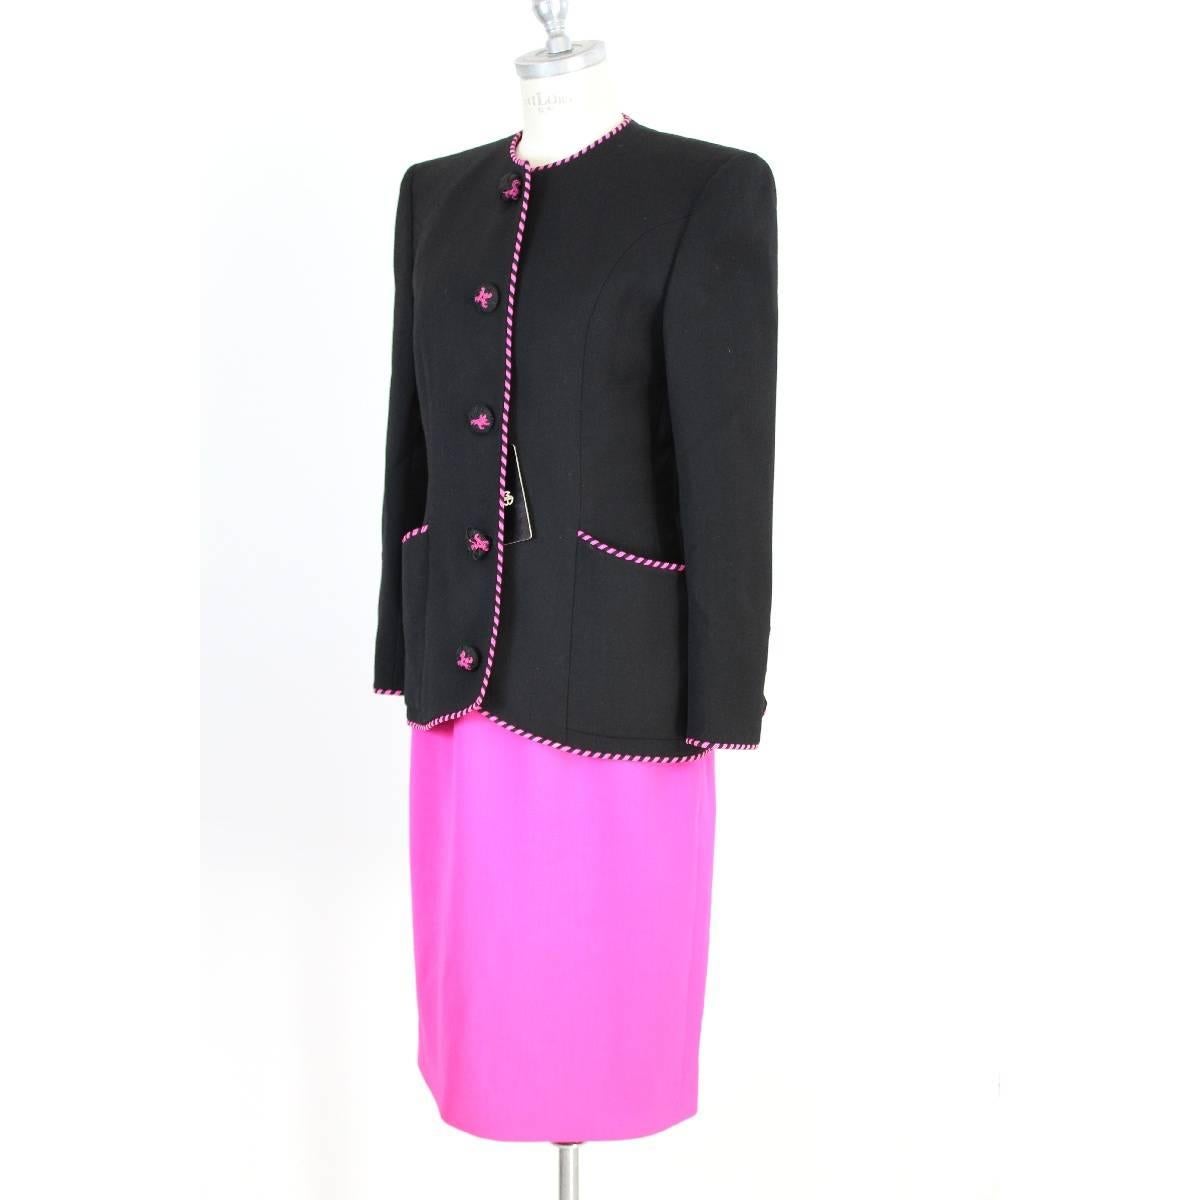 Mario Borsato vintage 1980s women’s skirt suit. Black jacket and purple skirt. Made in italy, size 42. Composition 100% wool. Lined 100% bemberg. New with label.

Size: 46 IT 12 US 14 UK

Shoulder: 46 cm
Bust / Chest: 50 cm
Sleeve: 62 cm
Length: 69